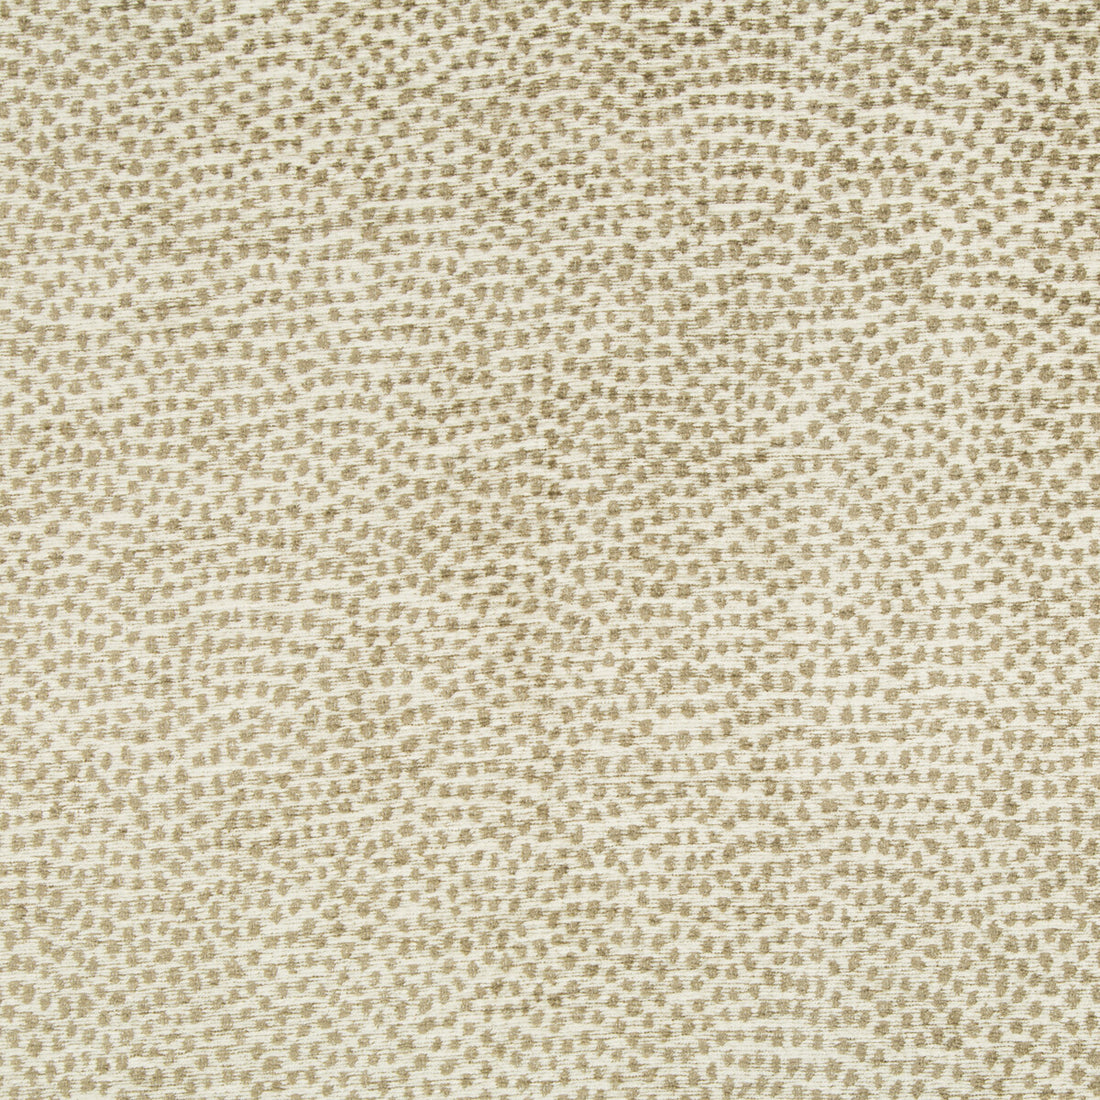 Kravet Design fabric in 34971-16 color - pattern 34971.16.0 - by Kravet Design in the Performance Crypton Home collection